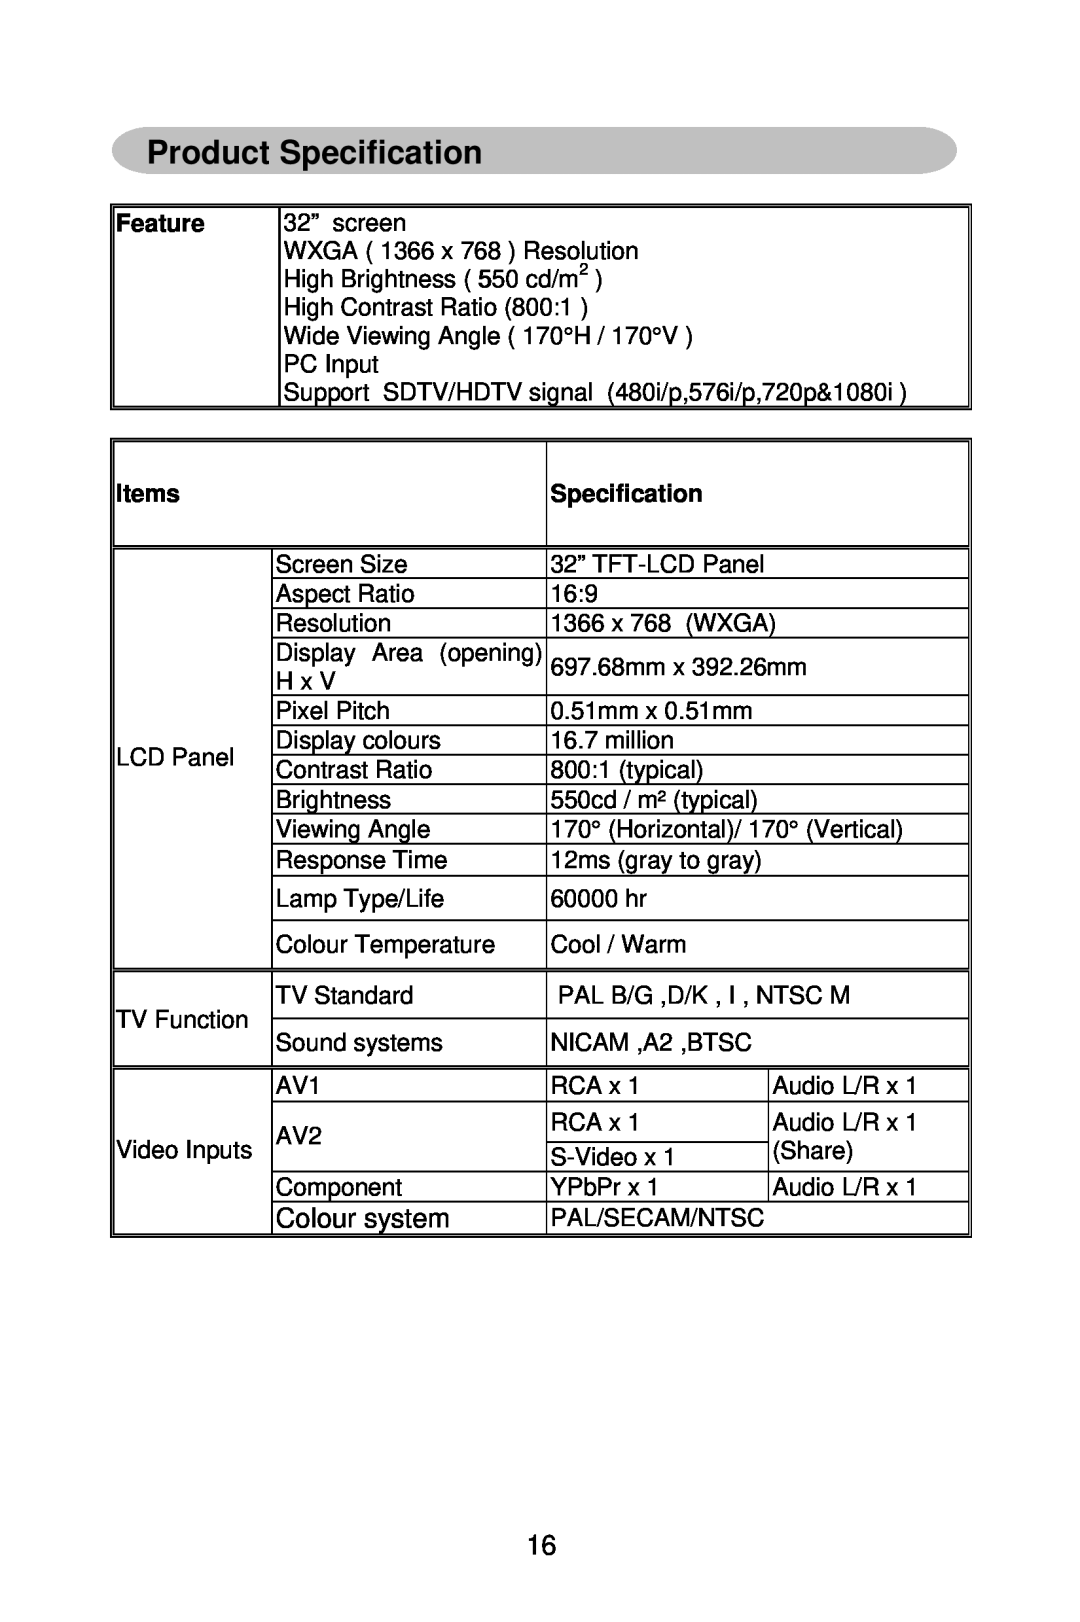 Mitsubishi Electronics DV321 user manual Product Specification, Colour system, Feature, PC Input, Items 